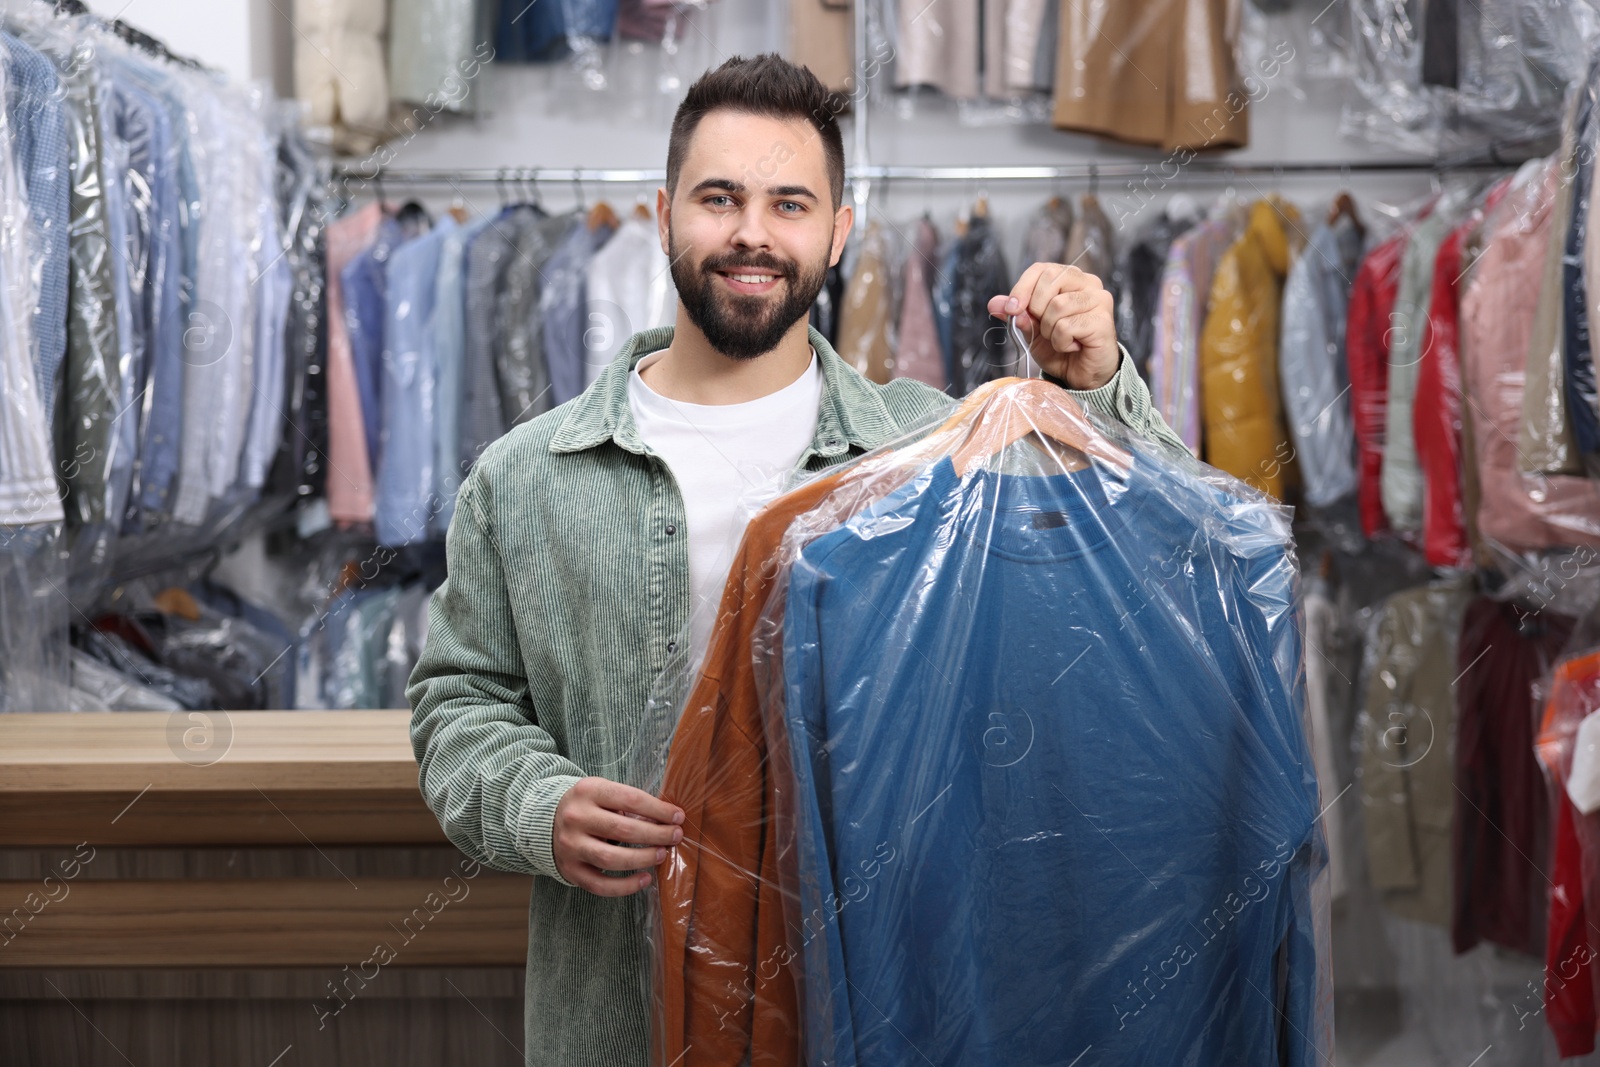 Photo of Dry-cleaning service. Happy man holding hangers with clothes in plastic bags indoors